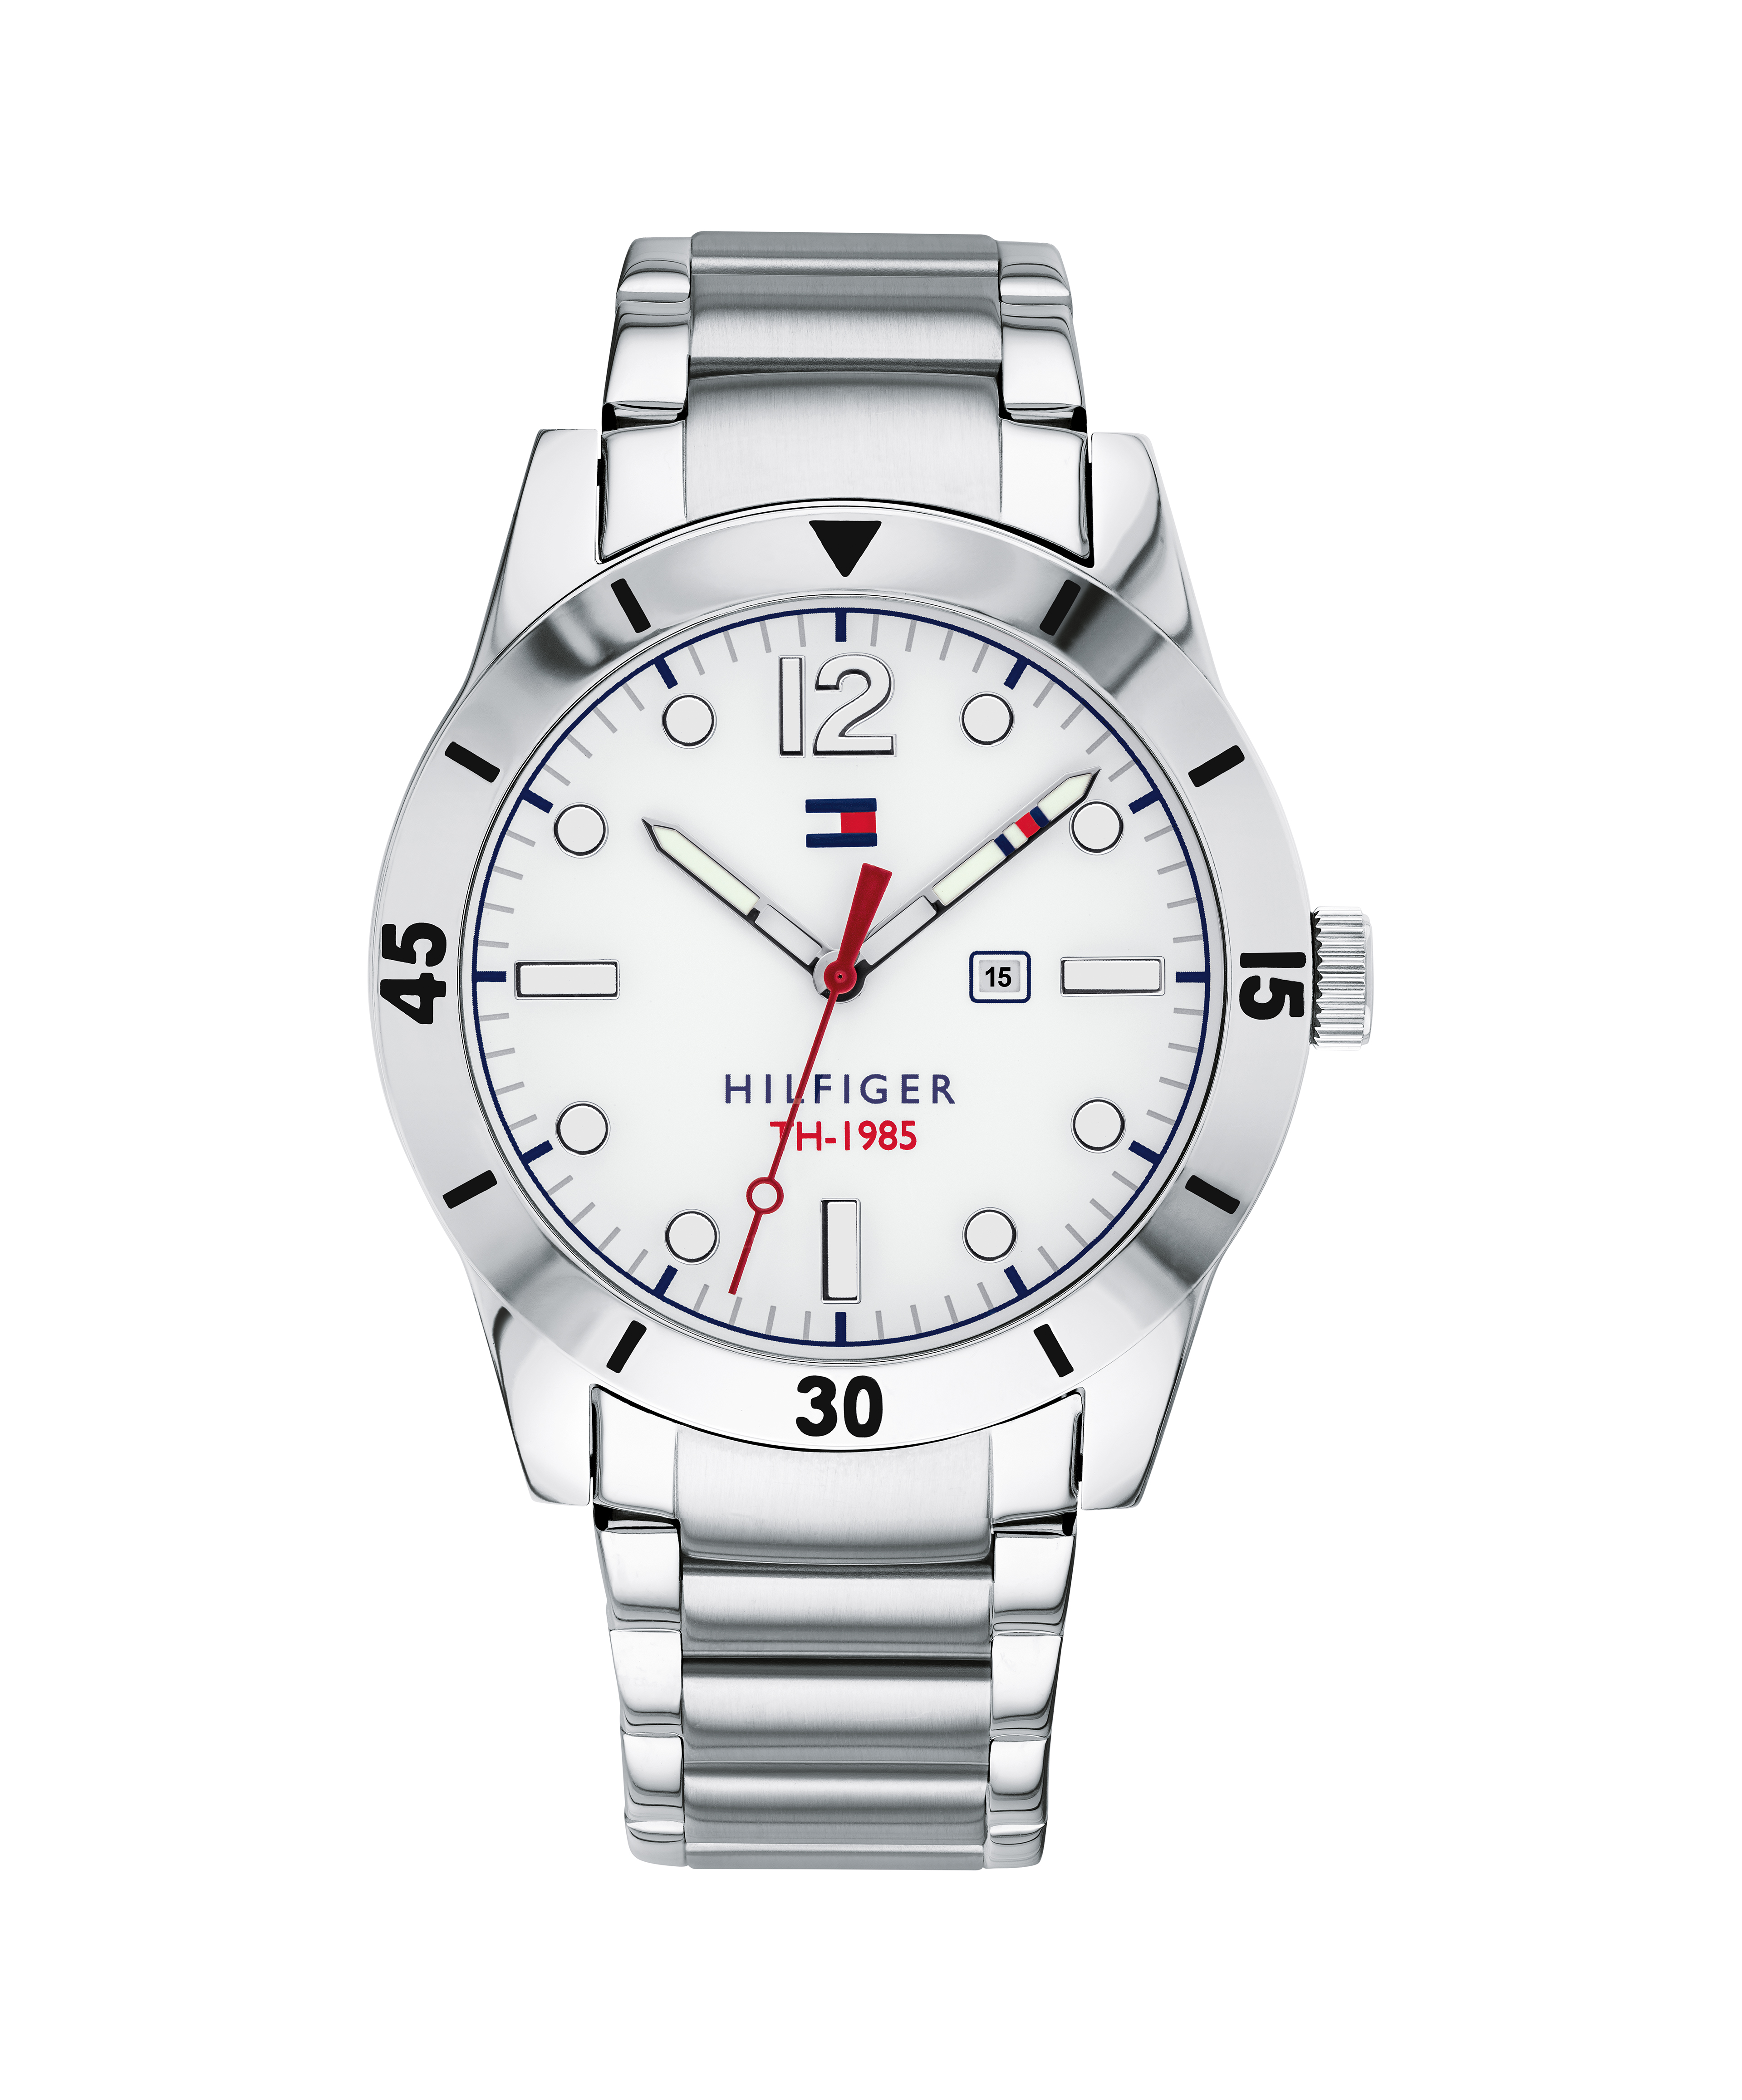 Tommy Hilfiger Store Bracelet Company Movado Staineless |Men\'s Hilfiger Steel Watches| Tommy Watch